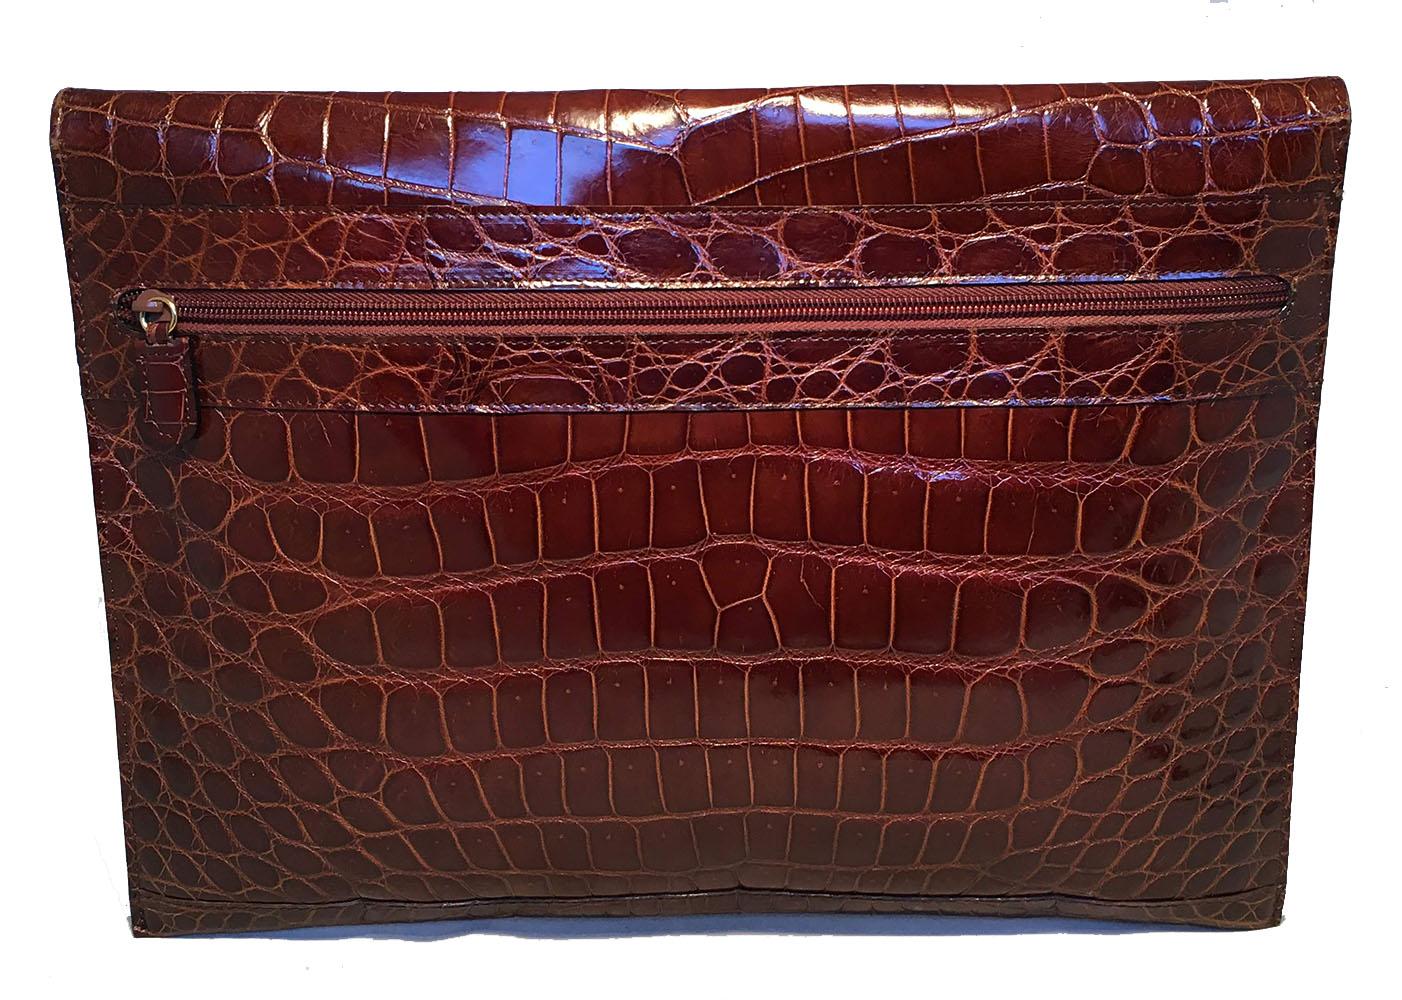 GORGEOUS Colombo Vintage Tan Crocodile Portfolio Clutch in excellent condition. Tan crocodile exterior trimmed with a gold hardware closure. Exterior back zippered pocket. Pinch lock flap closure opens to 2 separated interior compartments. Back